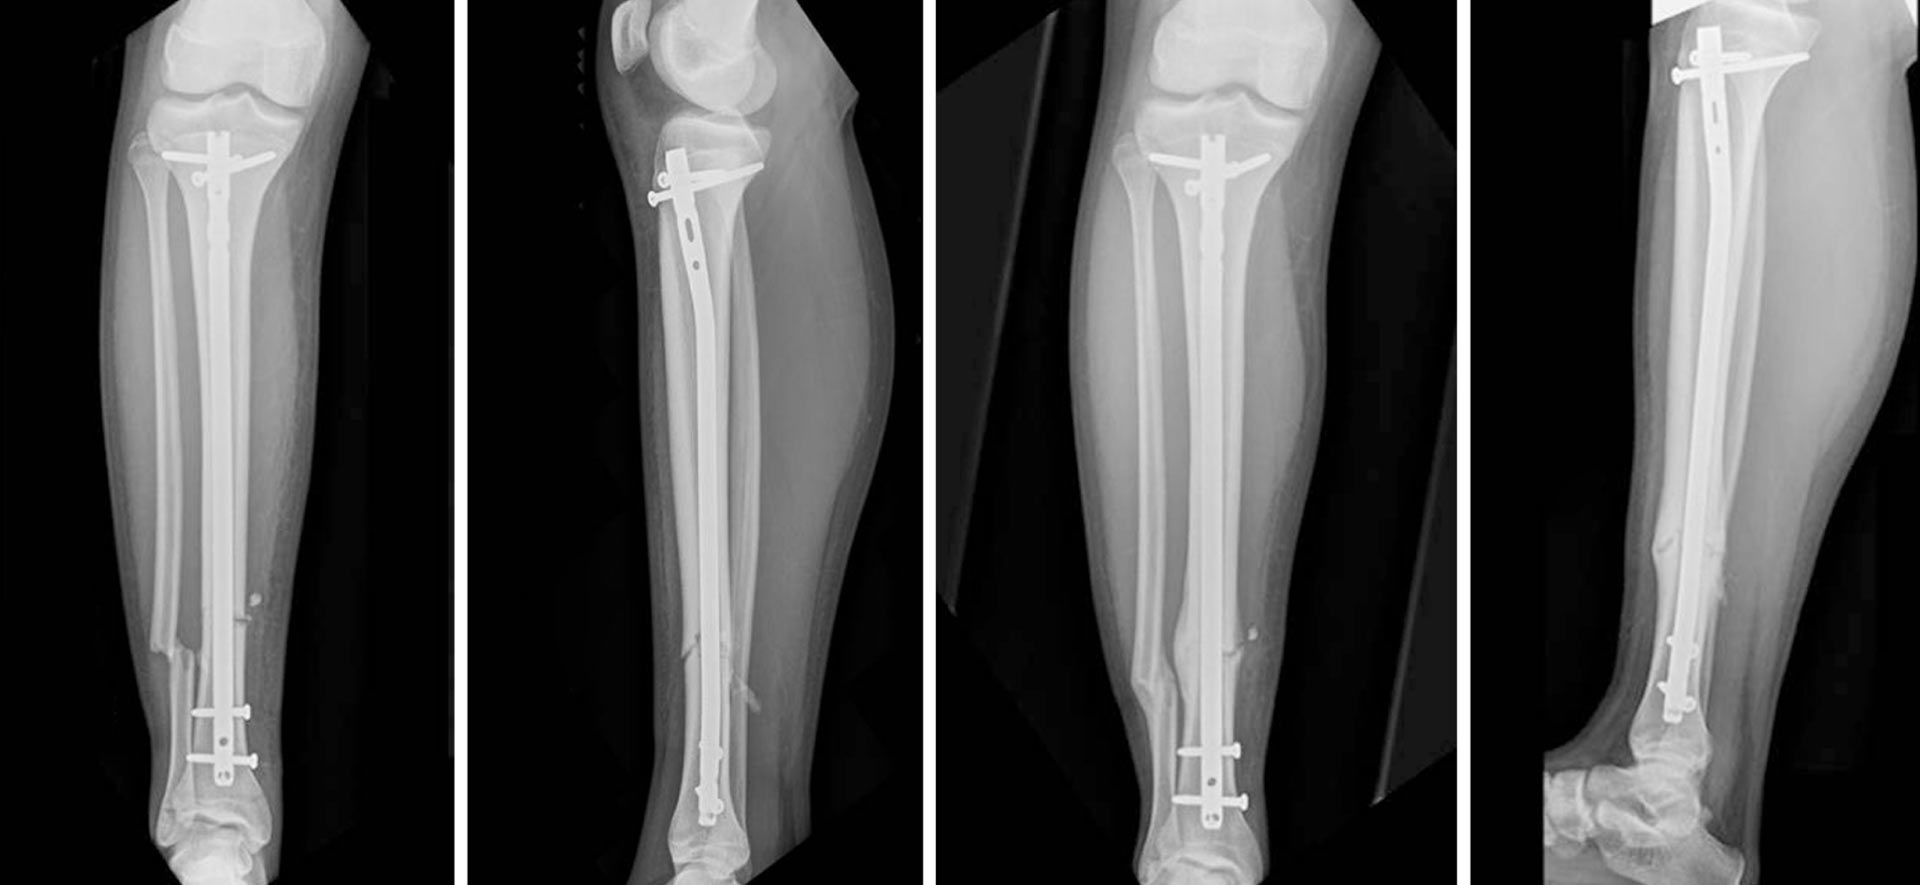 Intramedullary Nailing: Definitive as well as Prophylactic Fixation Method  in a Case of Bilateral Atypical Femoral Fractures – A Case Report | Journal  of Orthopaedic Case Reports